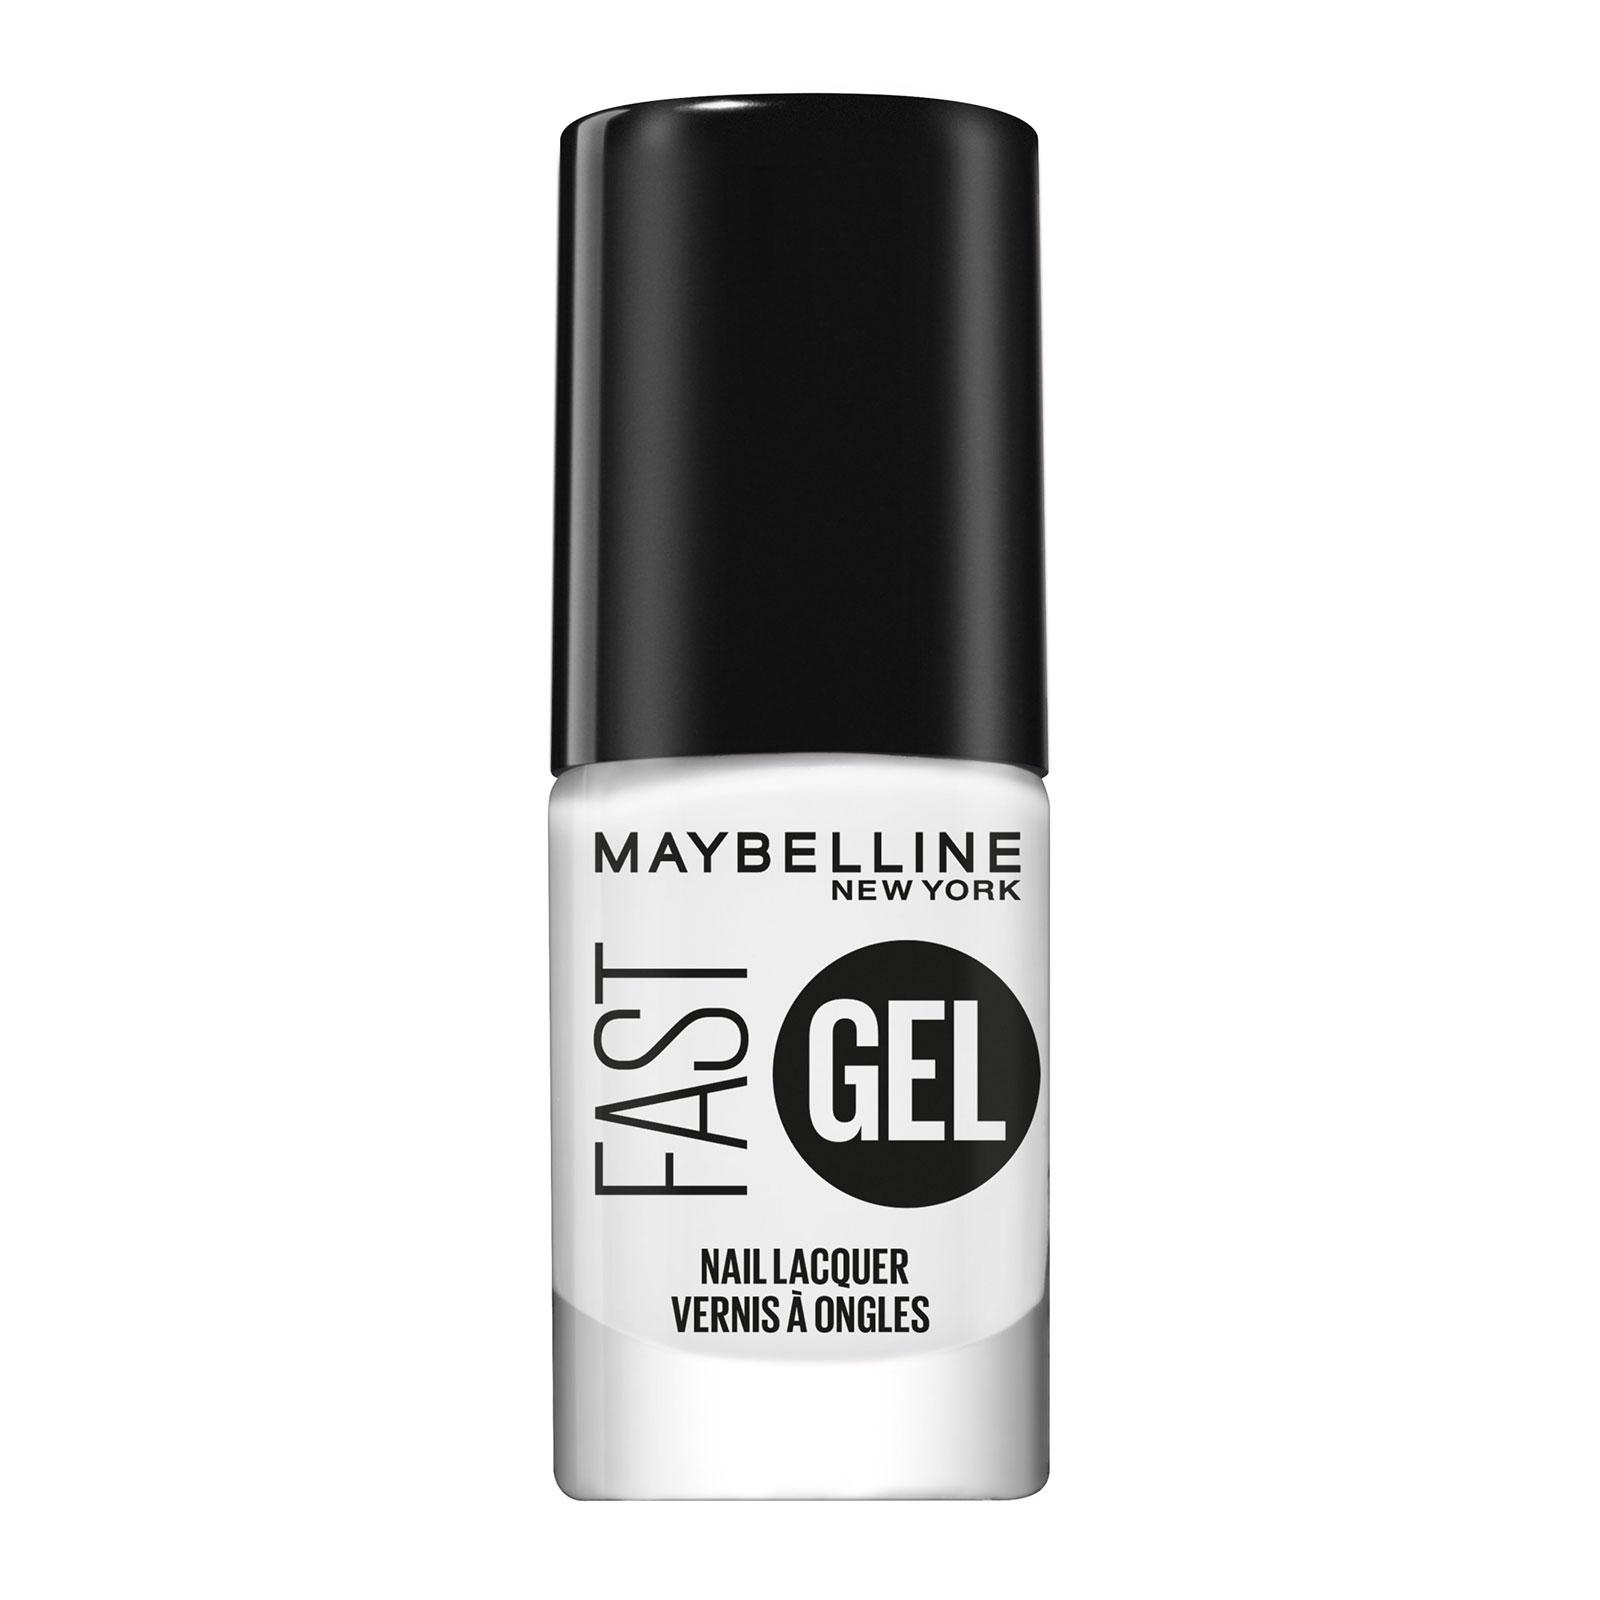 Maybelline Fast Gel Nail Lacquer Top Coat Long-Lasting, High-Shine Nail ...